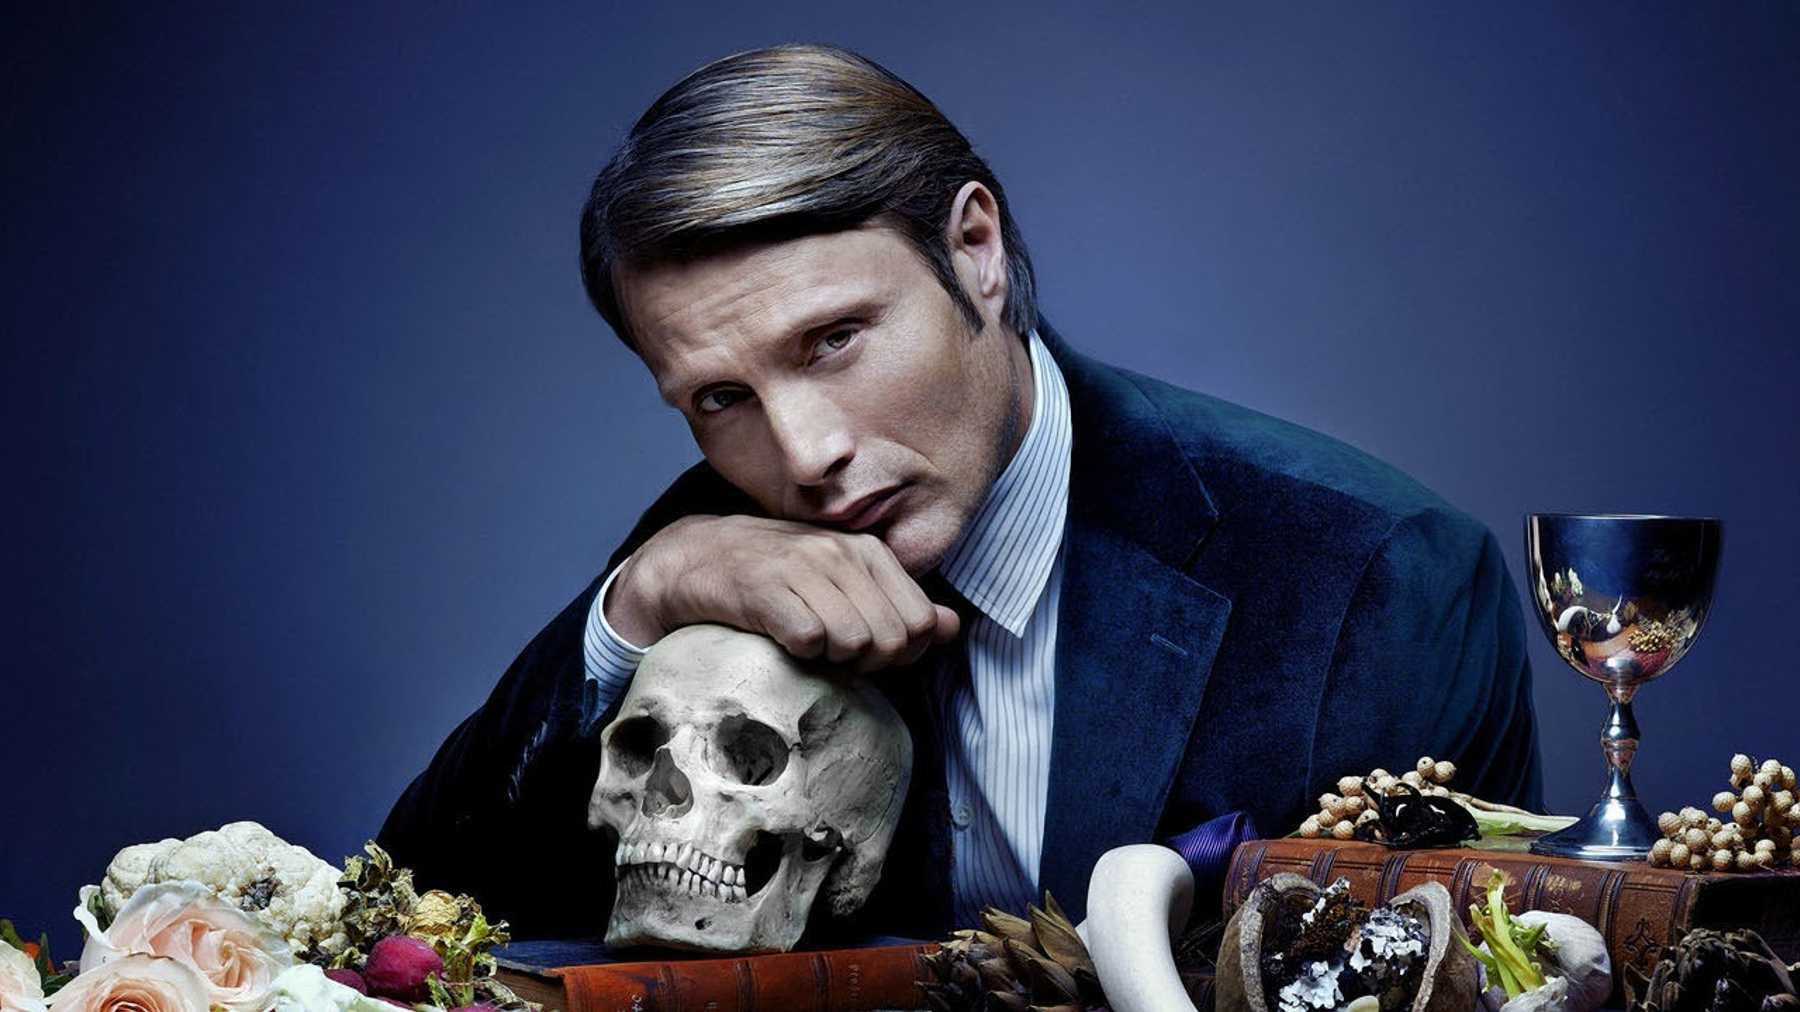 Bryan Fuller Hannibal is perfect adaptation, using familiar Thomas Harris characters and iconography to new, accomplished effect